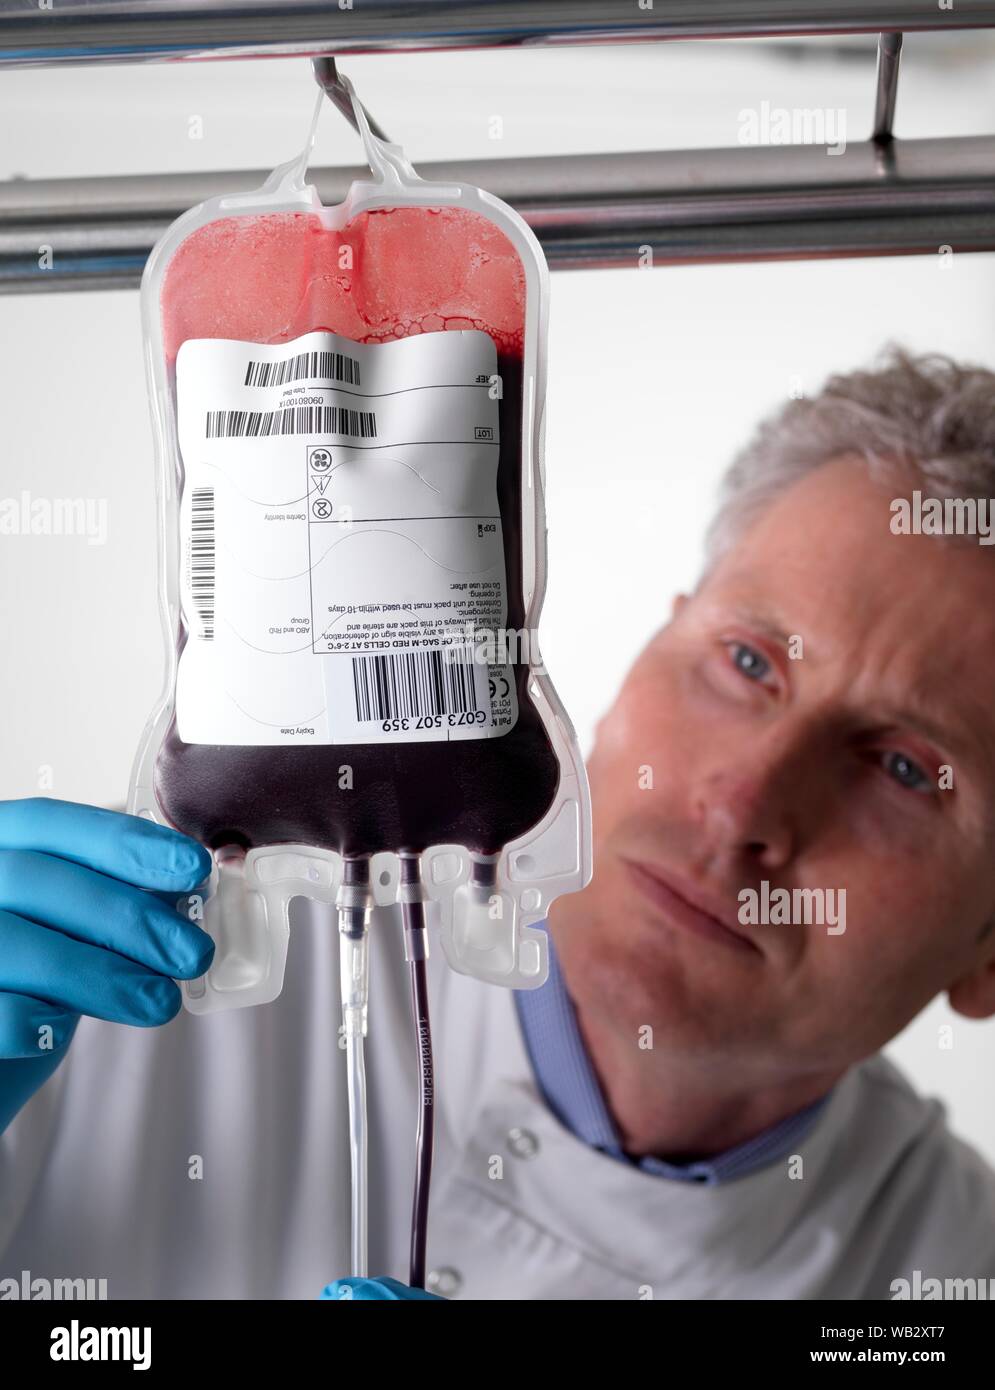 Donor blood processing. The donor blood is being separated into its component parts. Stock Photo